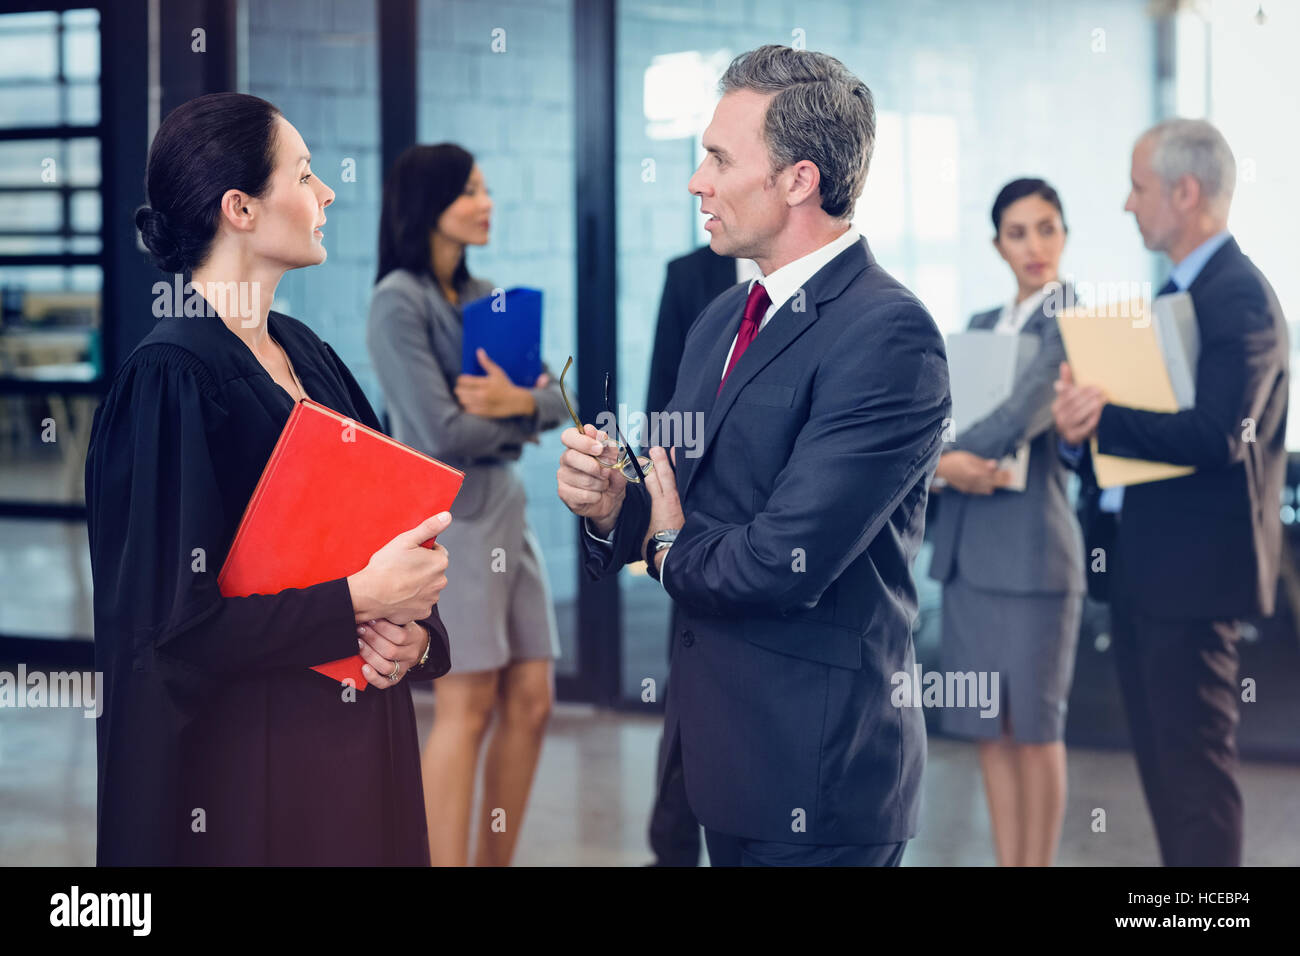 Side view of lawyer interacting with businessman Stock Photo